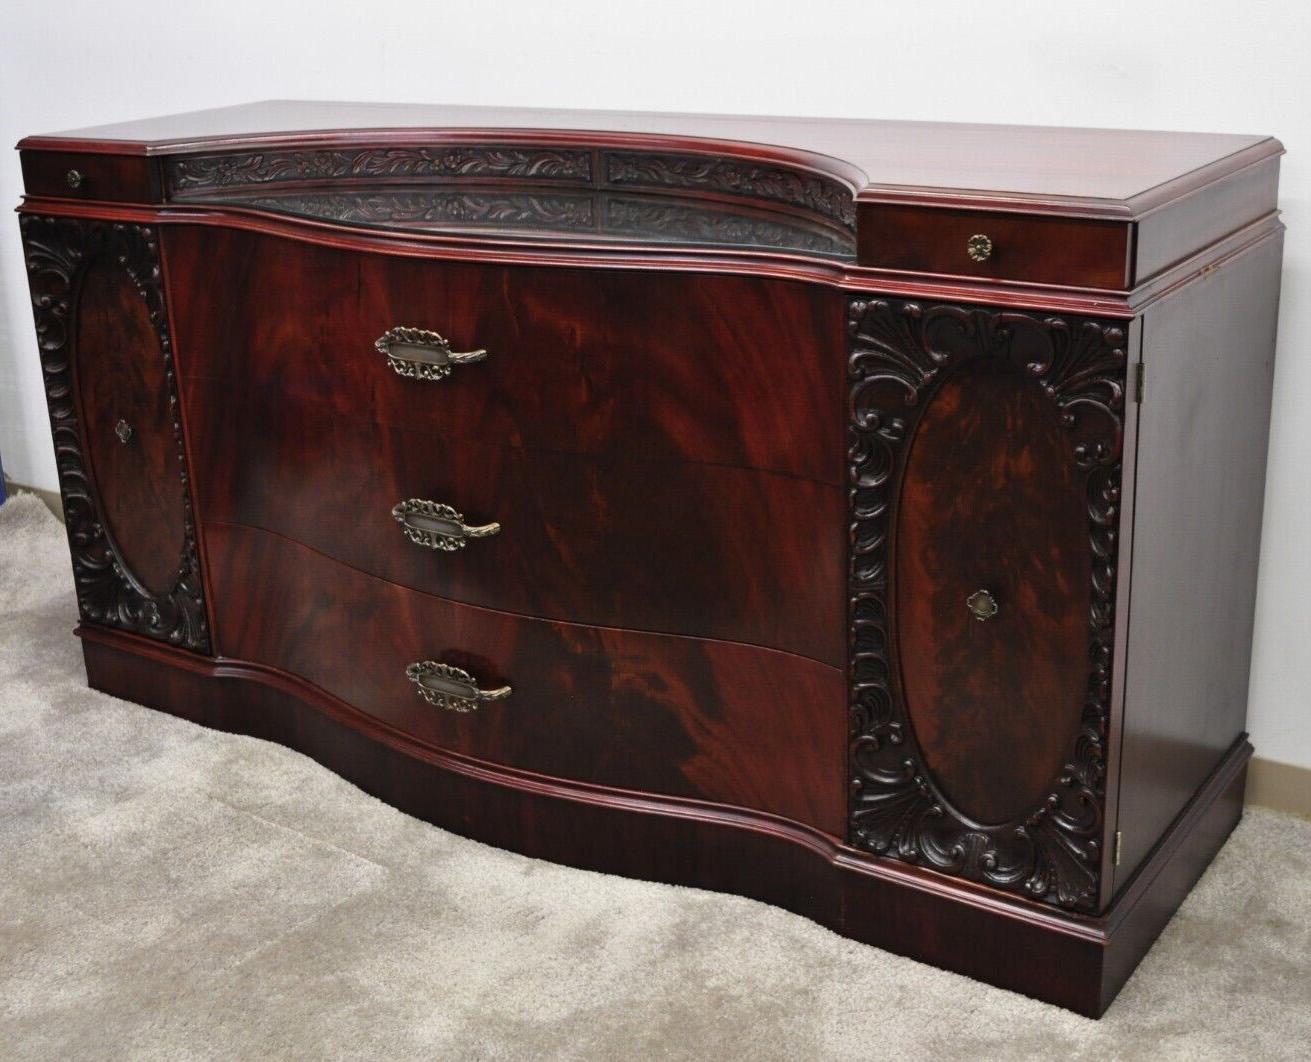 Vintage Chinese Chippendale Flame Mahogany Triple Dresser with Bowed Front and Mirror. Item features a mall mirrored surface, beautiful wood grain, nicely carved details, 2 swing doors, 9 drawers, very nice vintage item, great style and form. Circa